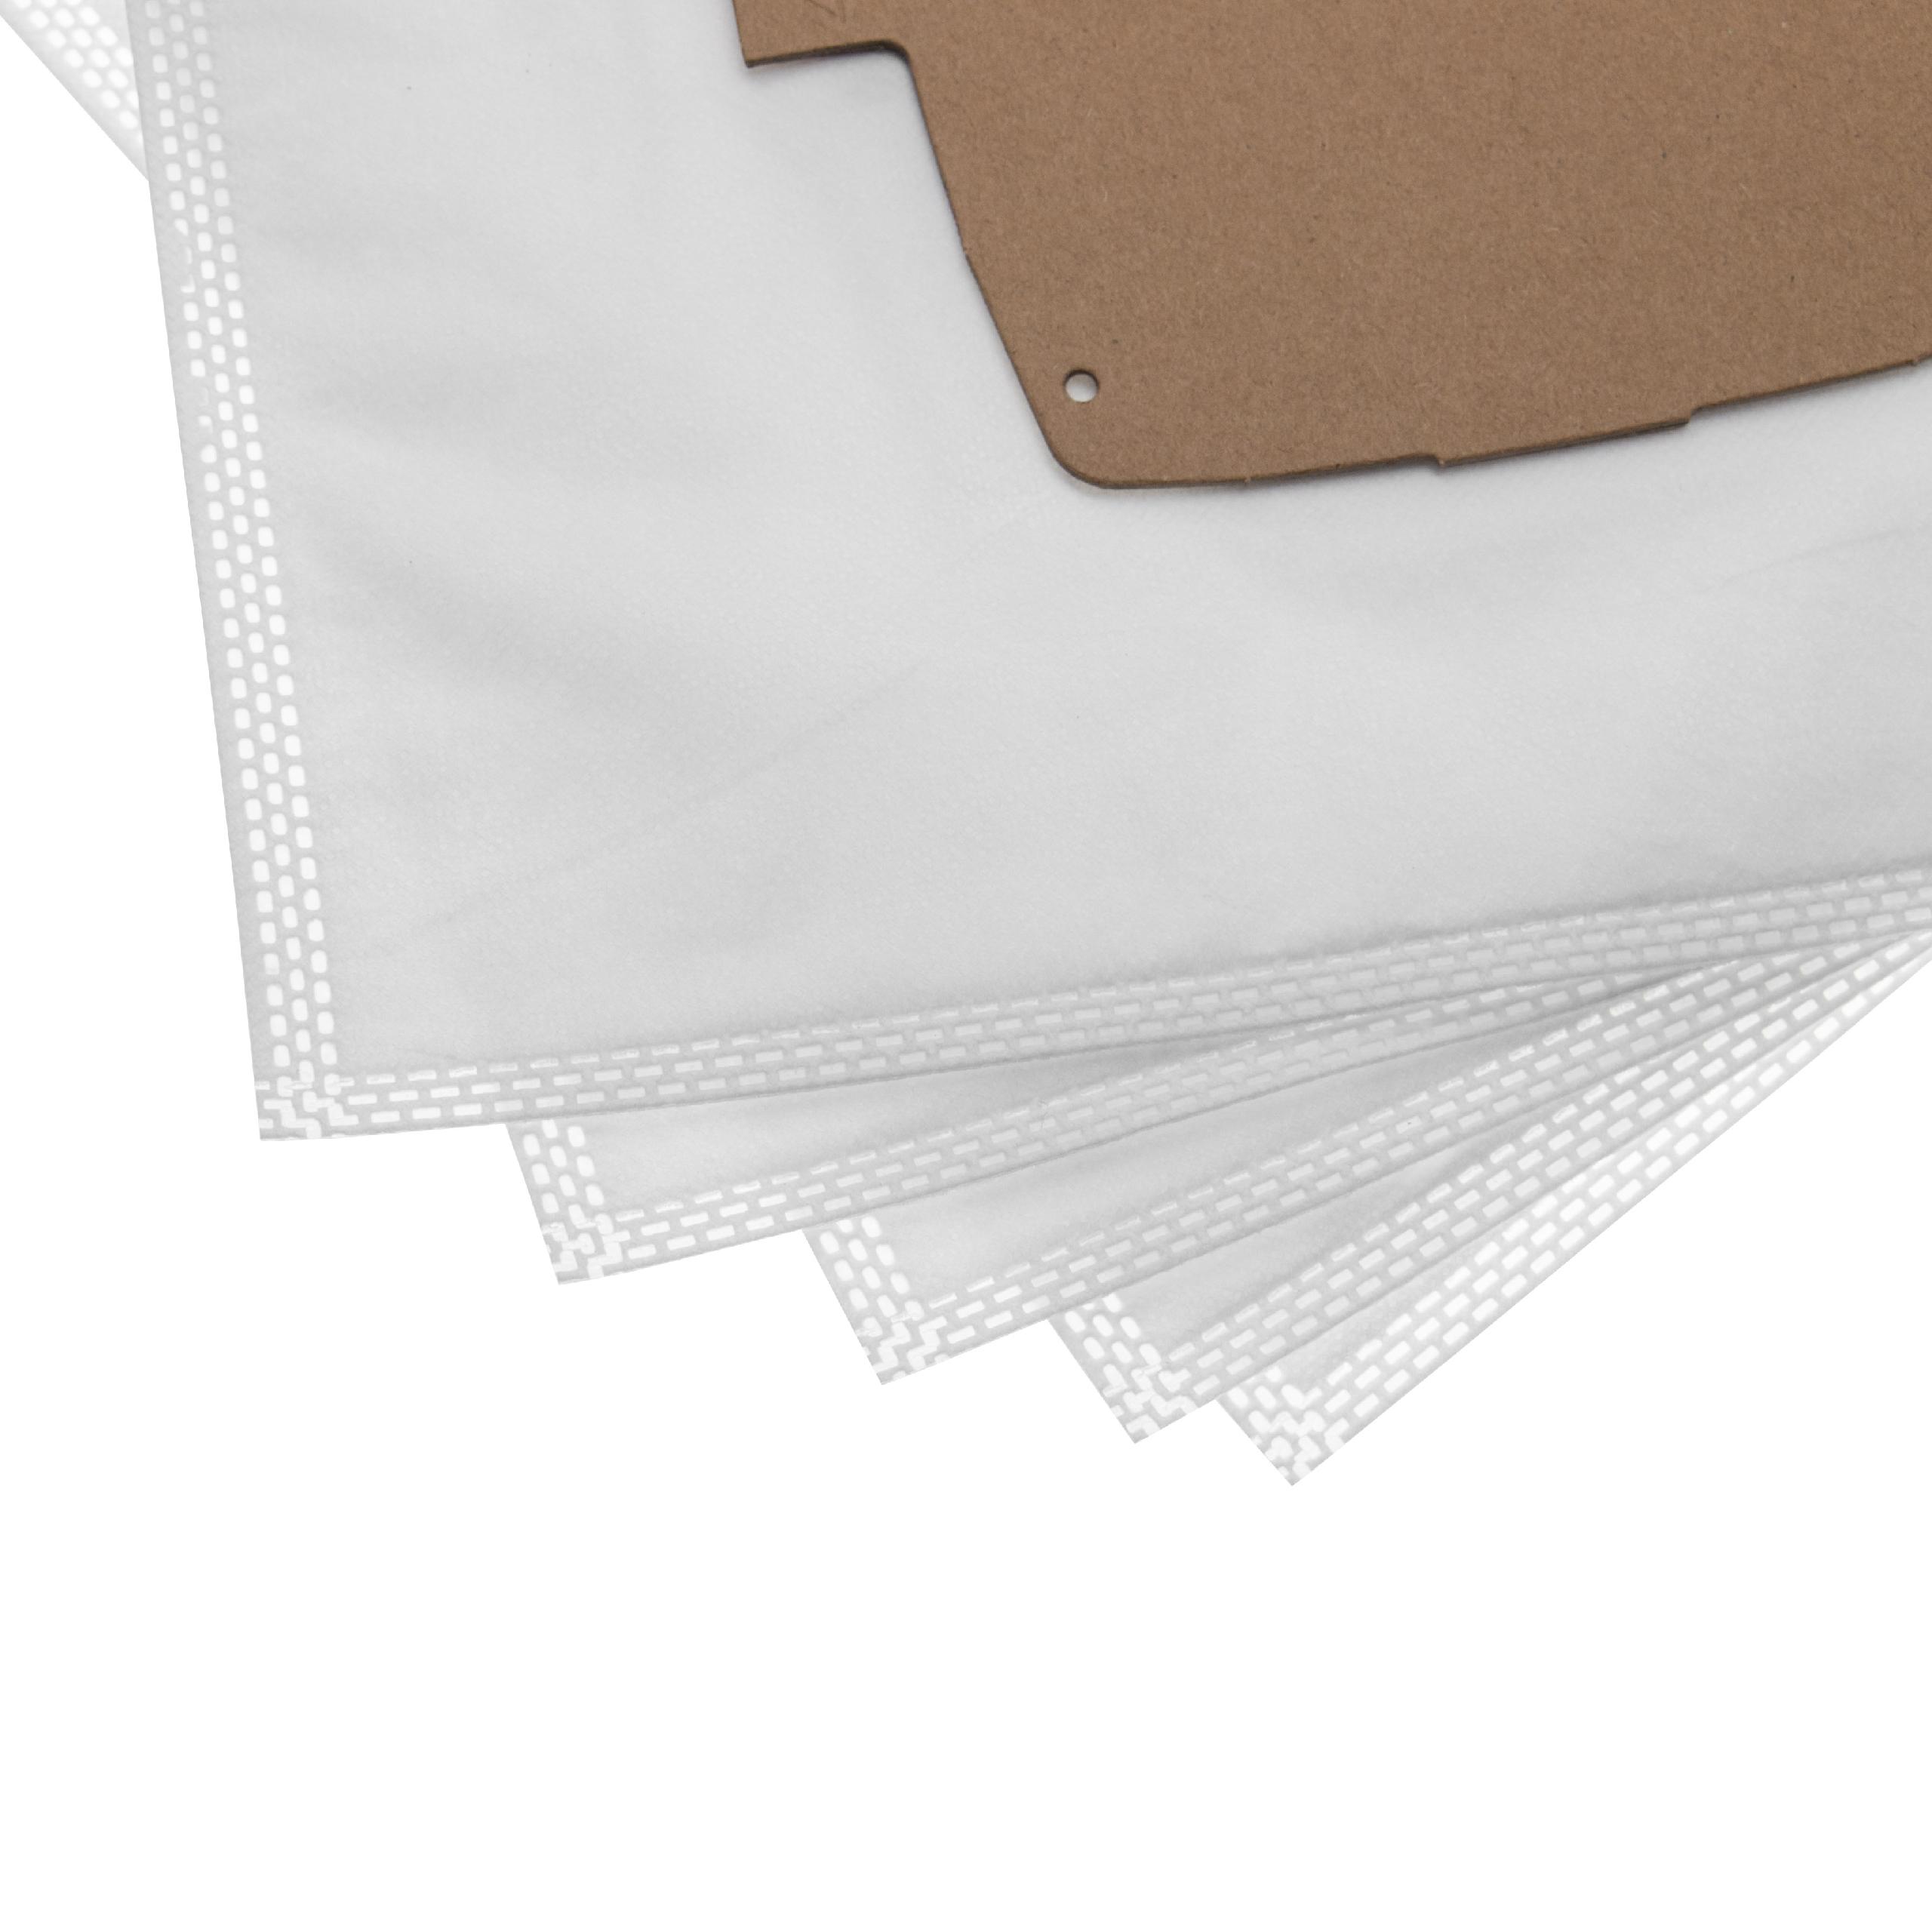 5x Vacuum Cleaner Bag replaces Europlus V2504 for Lloyds - microfleece